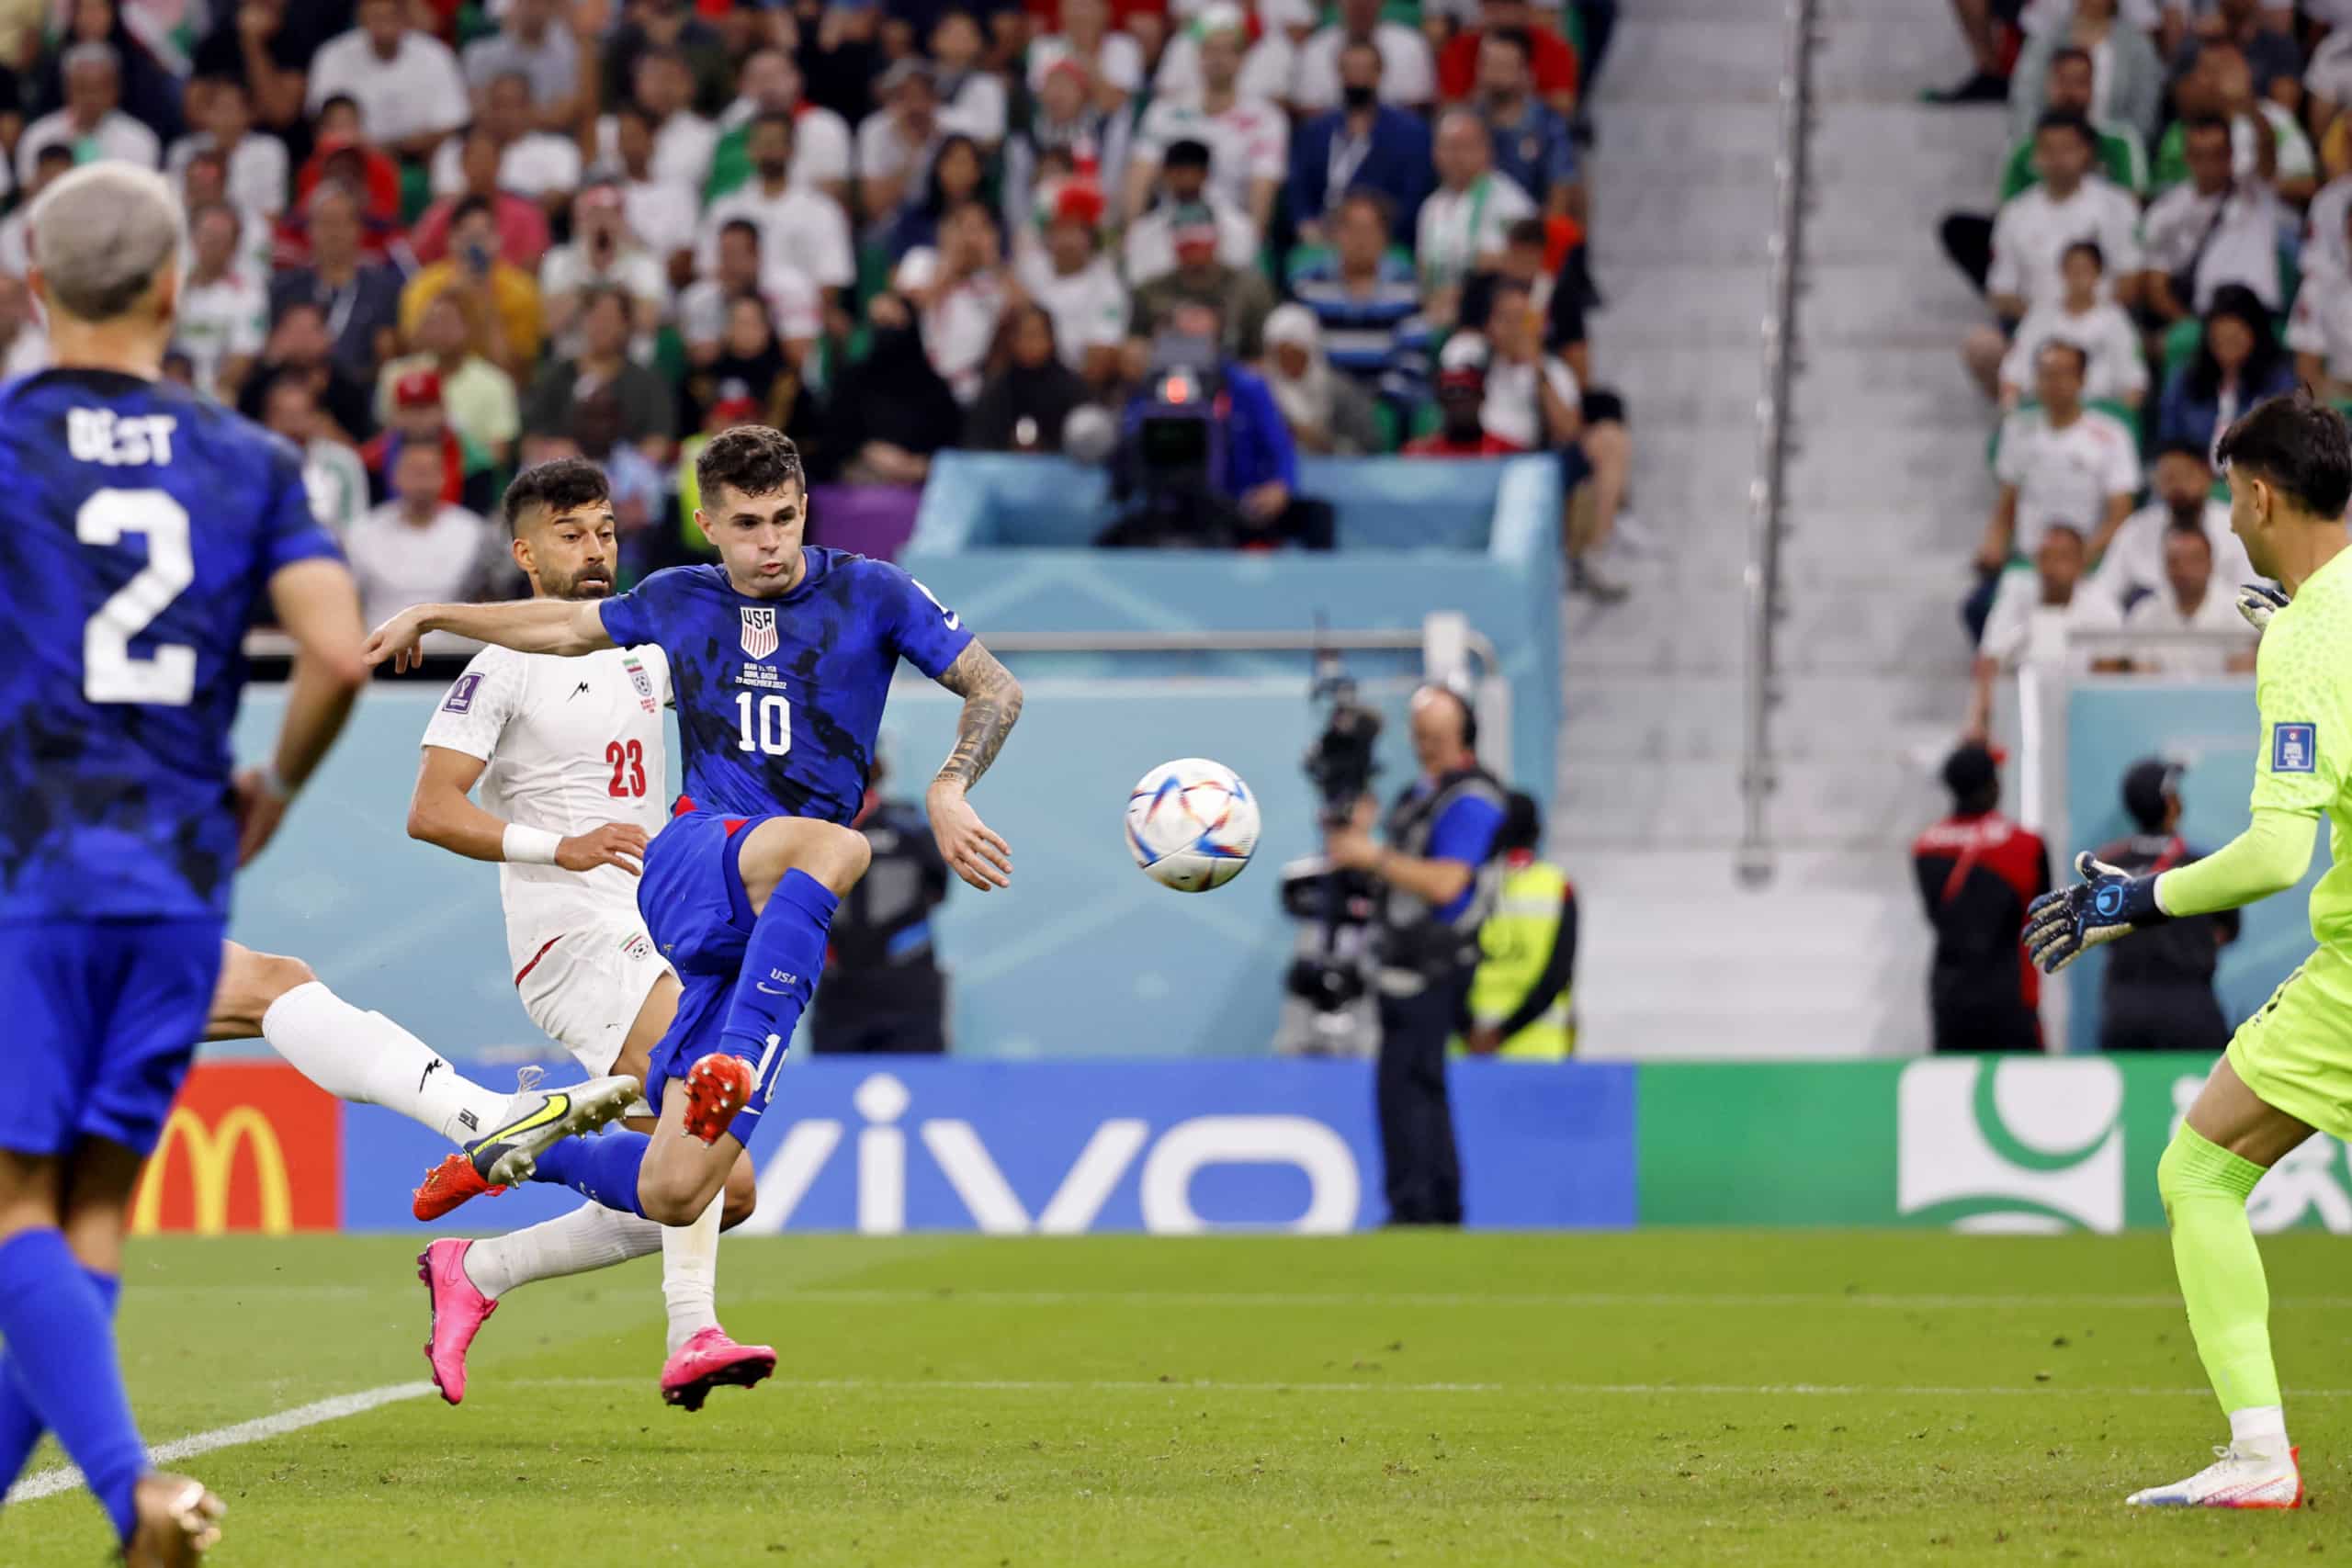 American soccer player Christian Pulisic scores volley past Iranian goal keeper in World Cup match up